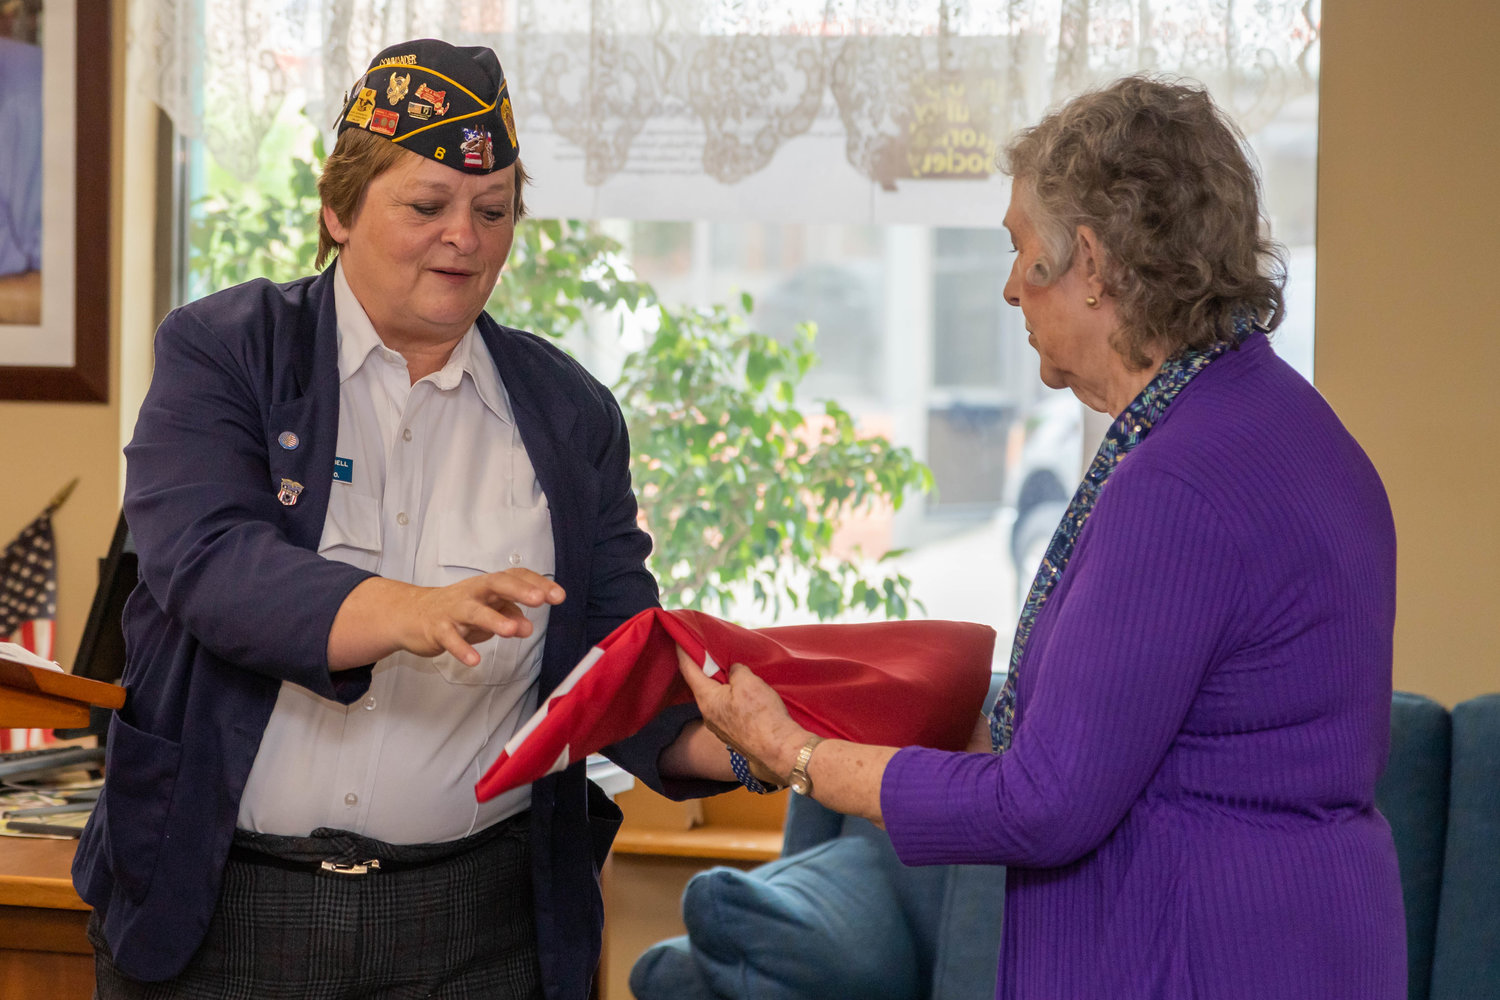 Phyllis Campbell, left, district commander of Post 6 Bazaan Bailey American Legion, presents a five-star flag commissioned by the Legion to Randolph County Historical Society President Joyce Campbell on Armed Forces Day at the museum. The flag honors former Randolph County resident, Gen. Omar Bradley.